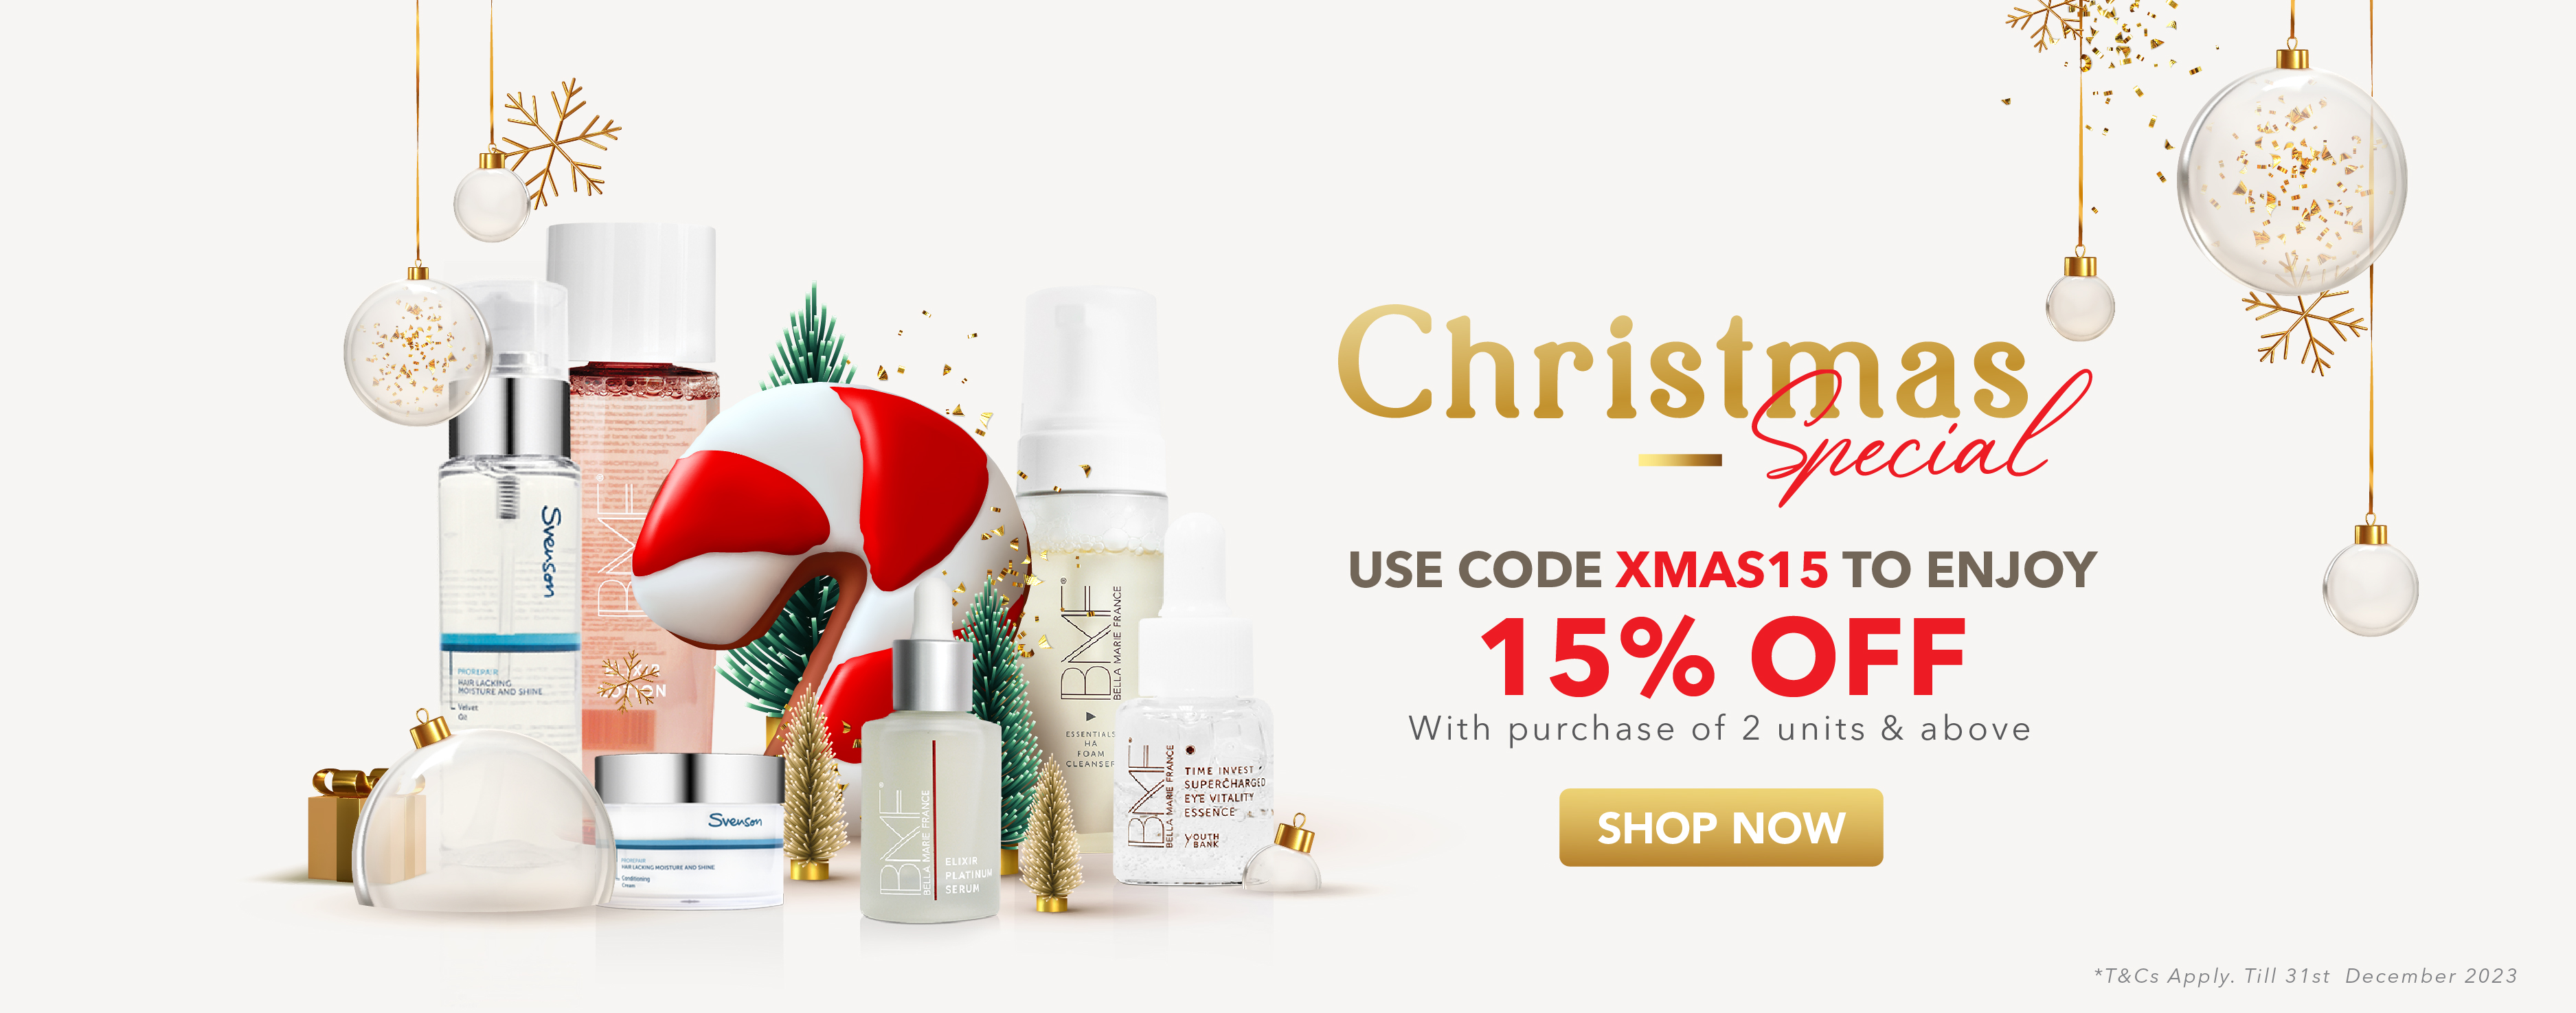 Christmas Special - 15% Off With Purchase of 2 Units and Above